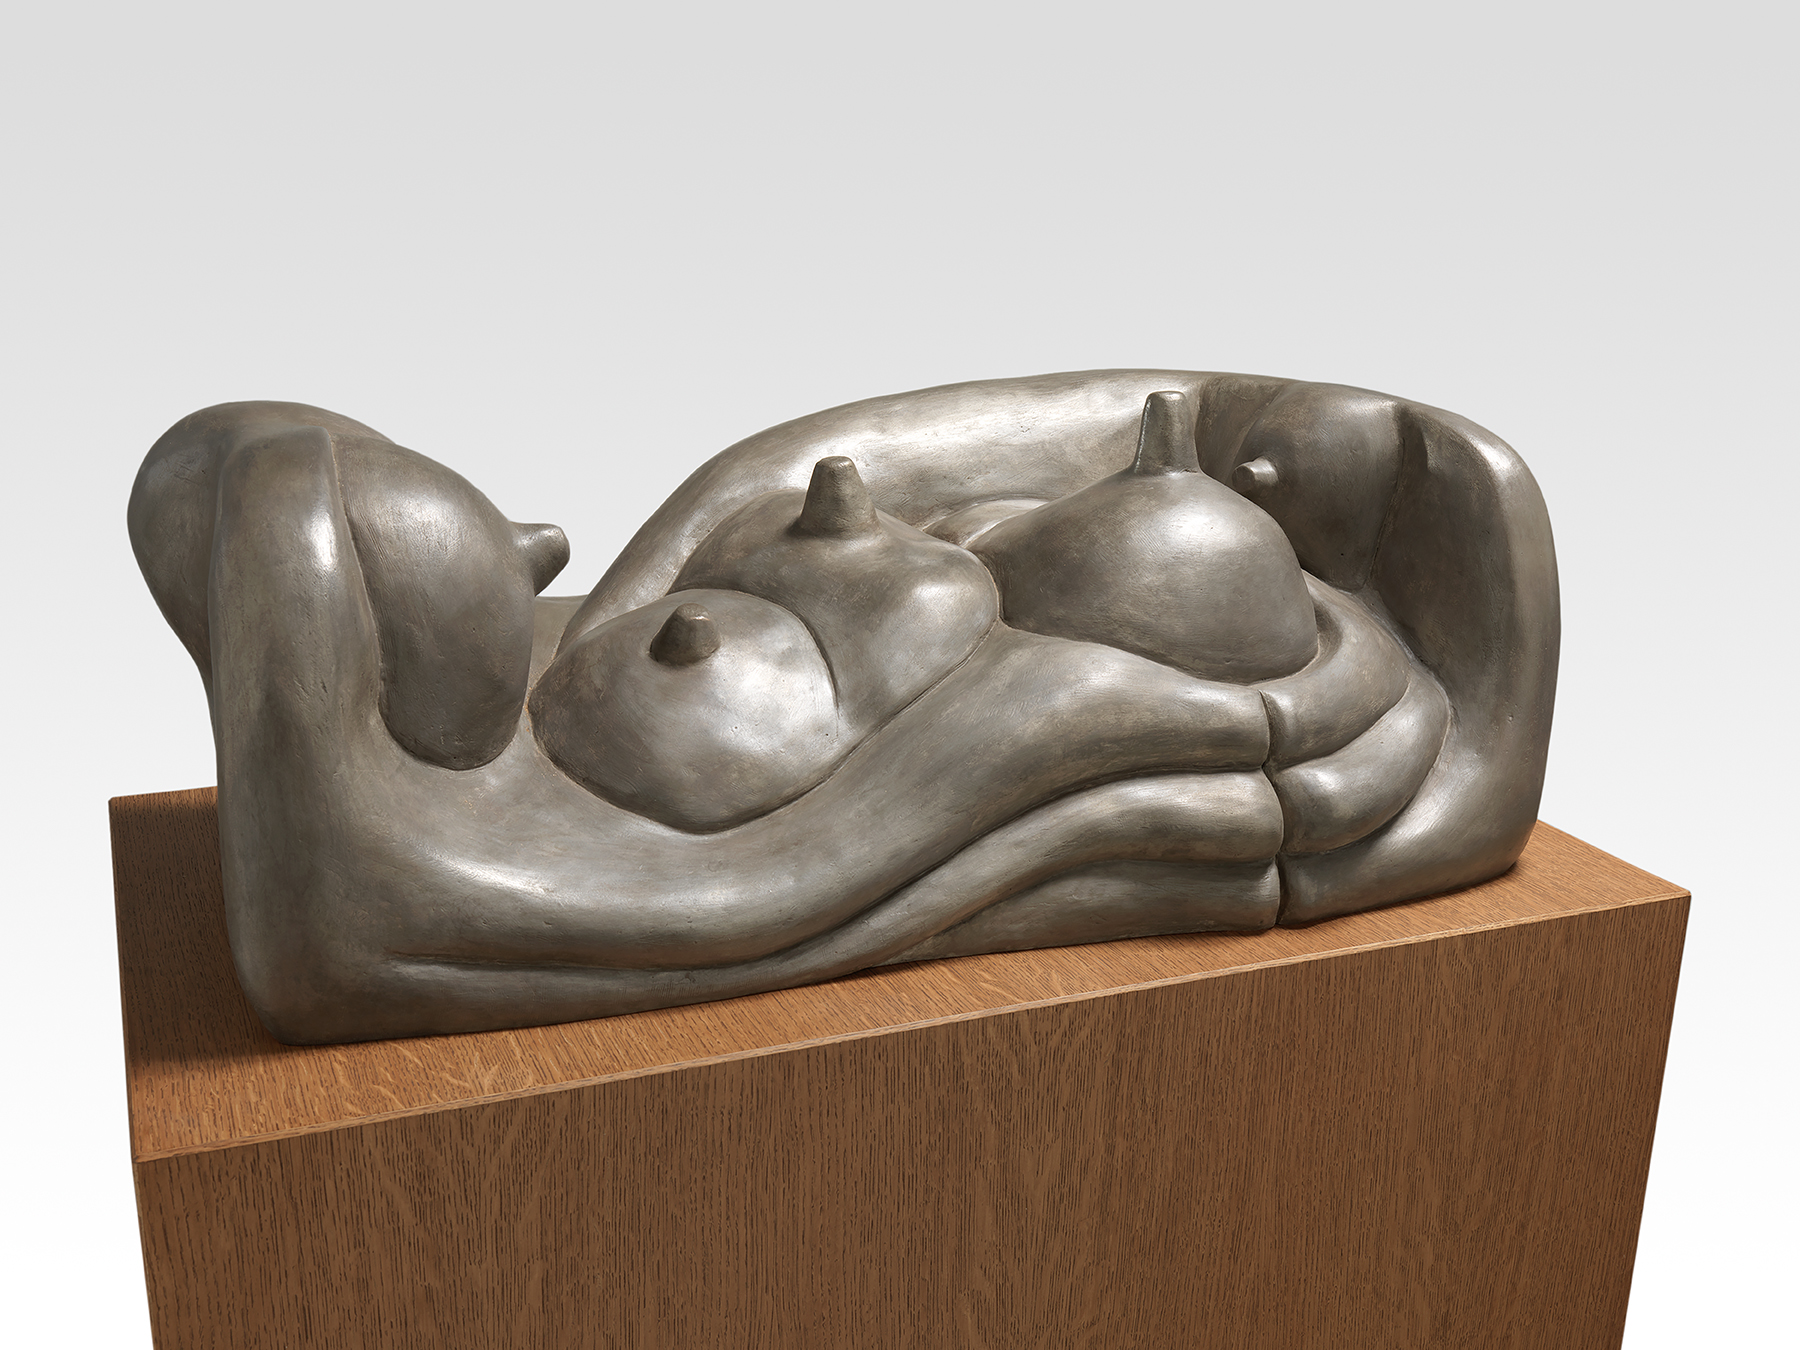 Louise Bourgeois's bronze sculpture Breasts and Blade